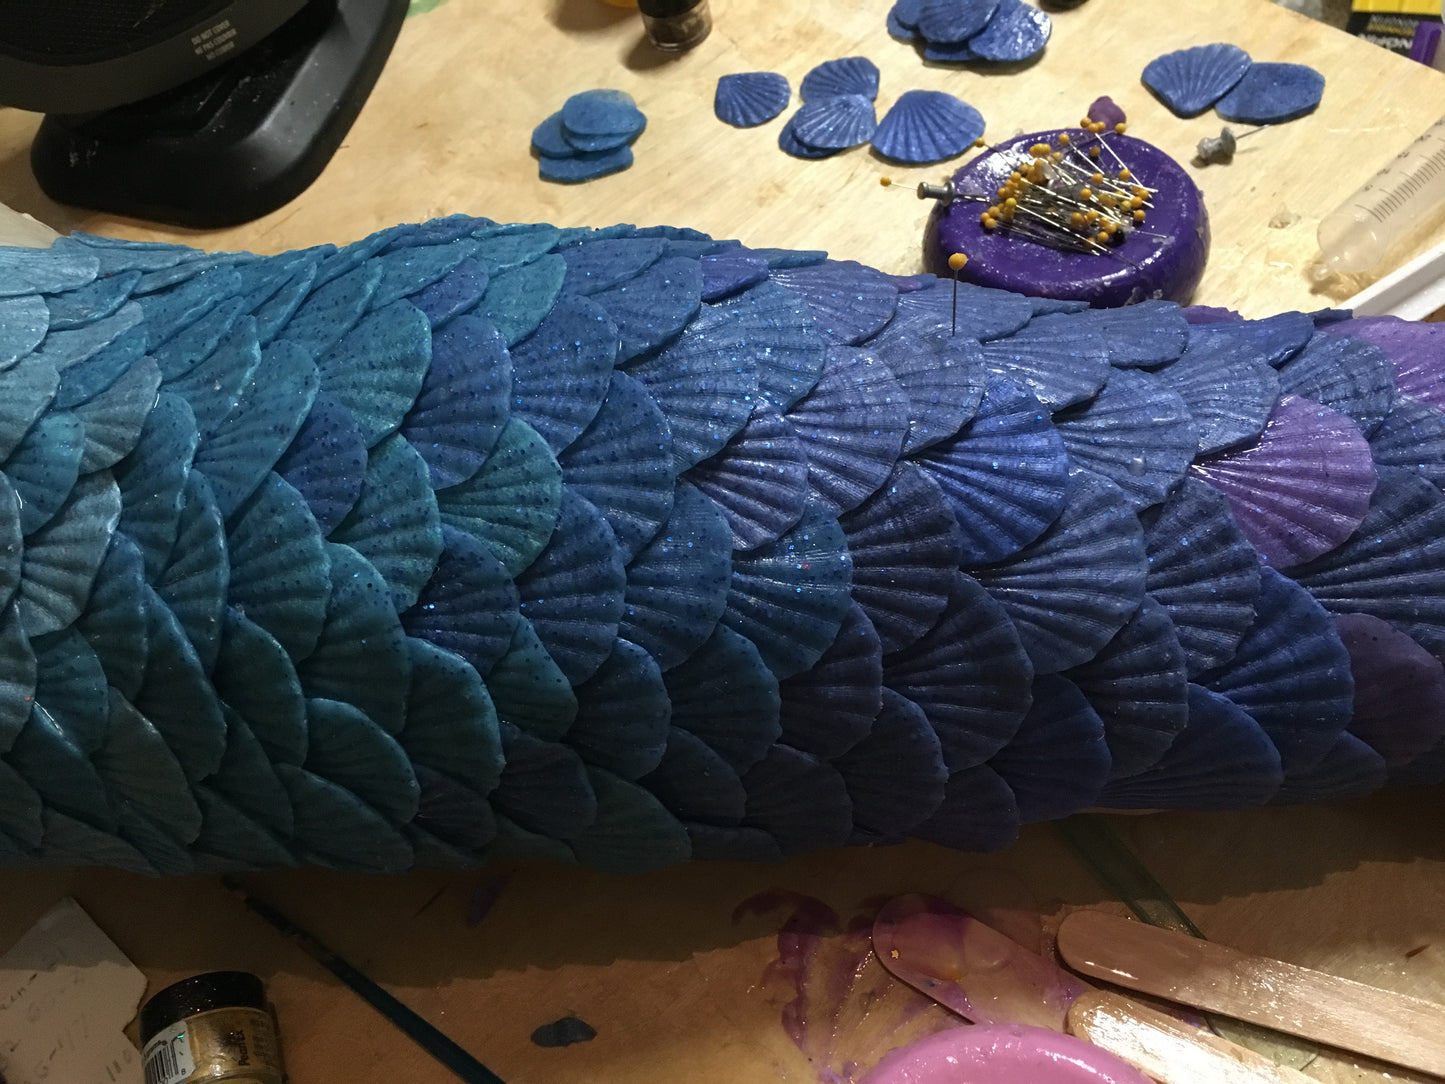 Silicone mermaid scales